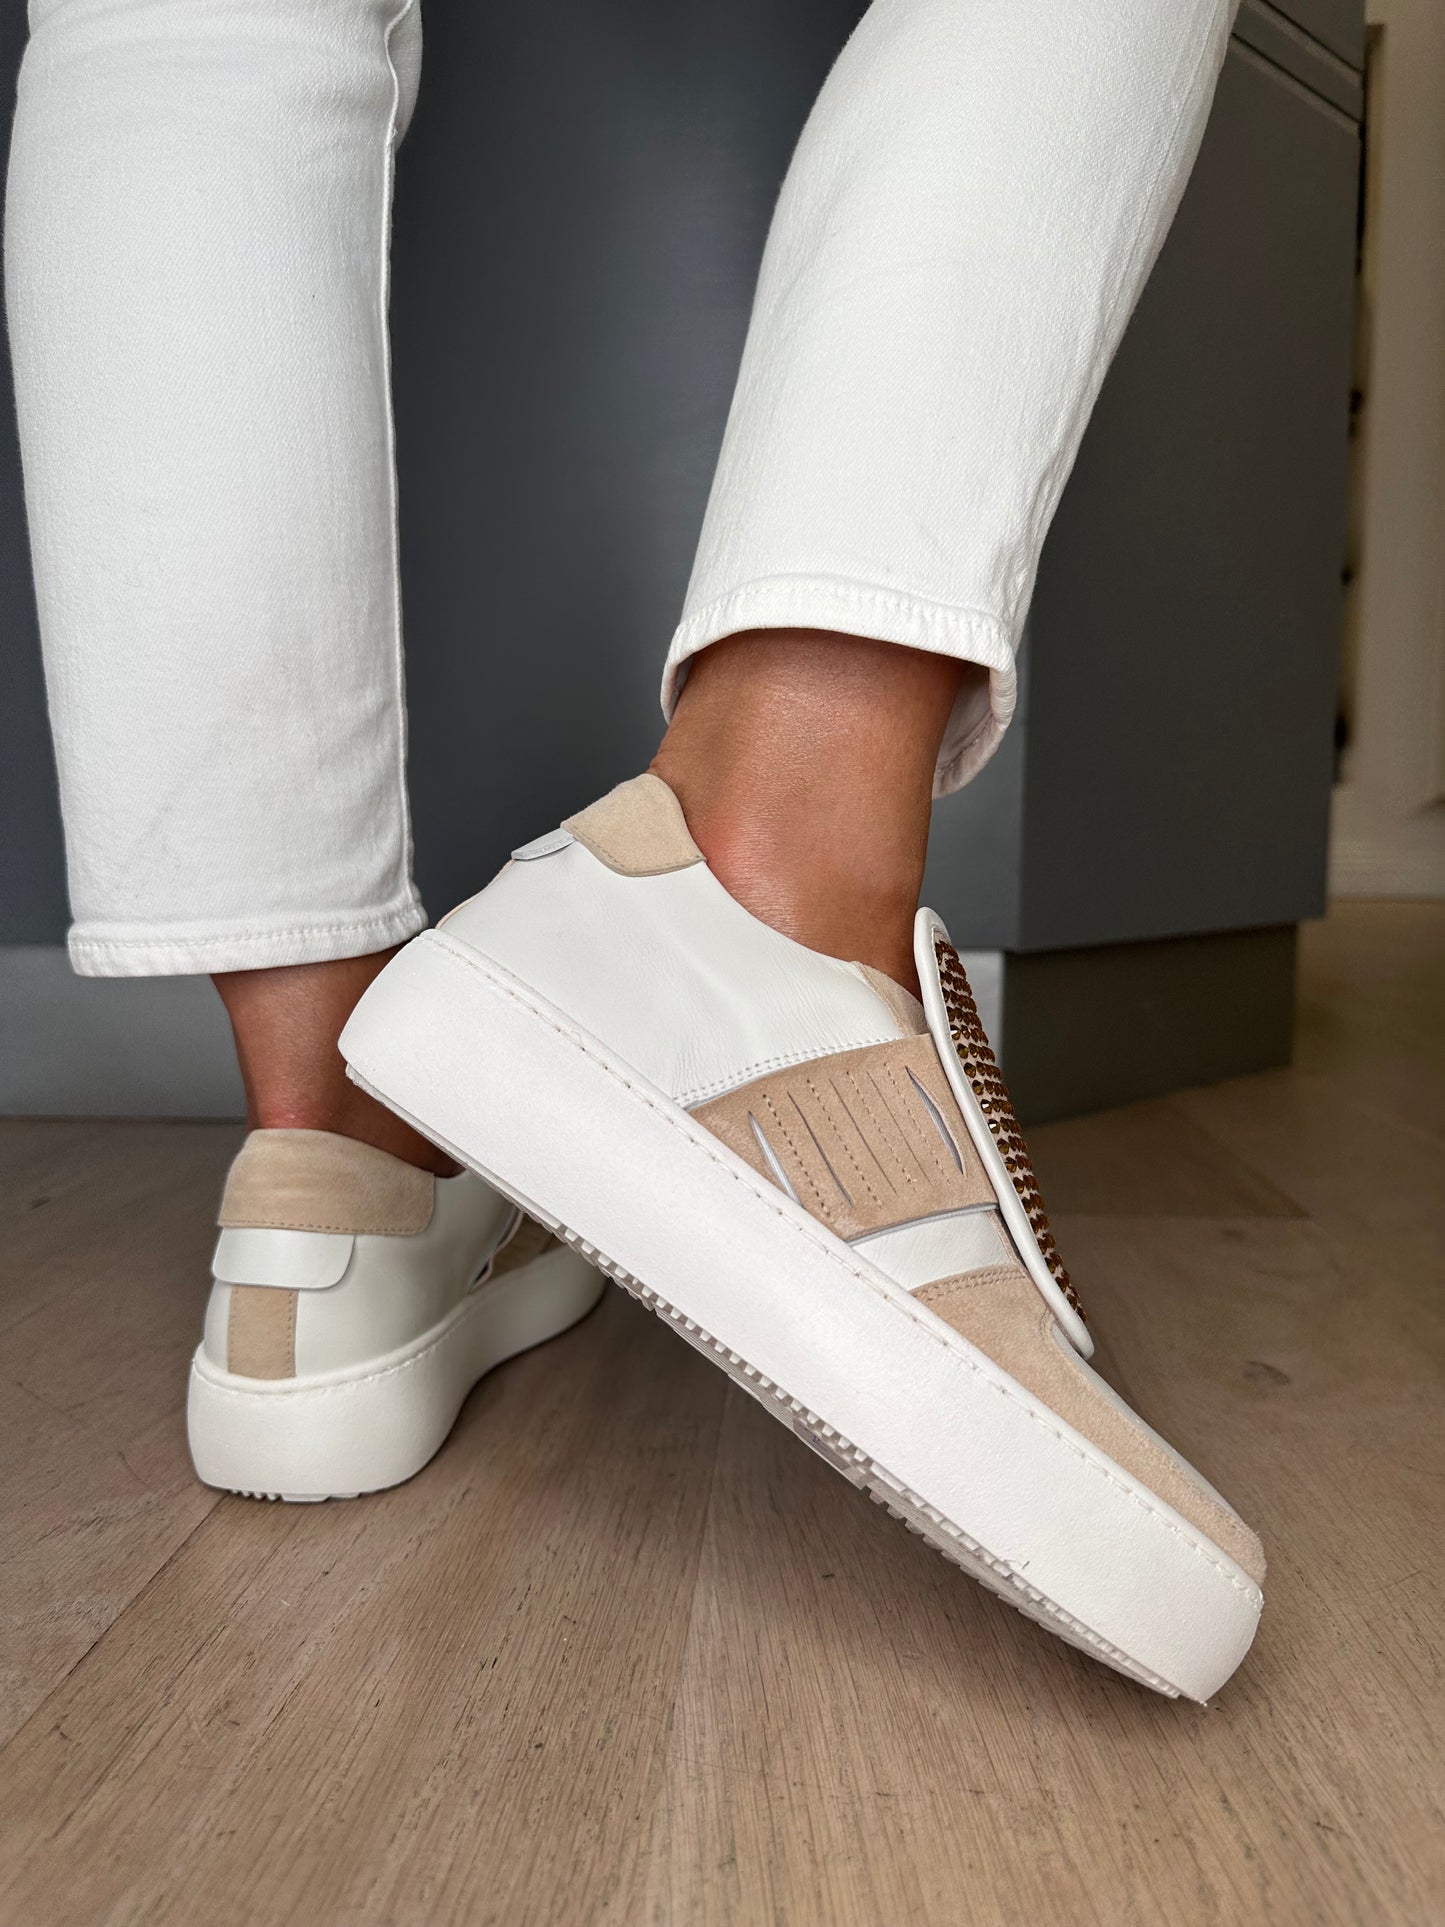 Oxitaly ( Fratelli Russo) 'Claire' White Leather/Sand Suede Flatform Studded Trainer